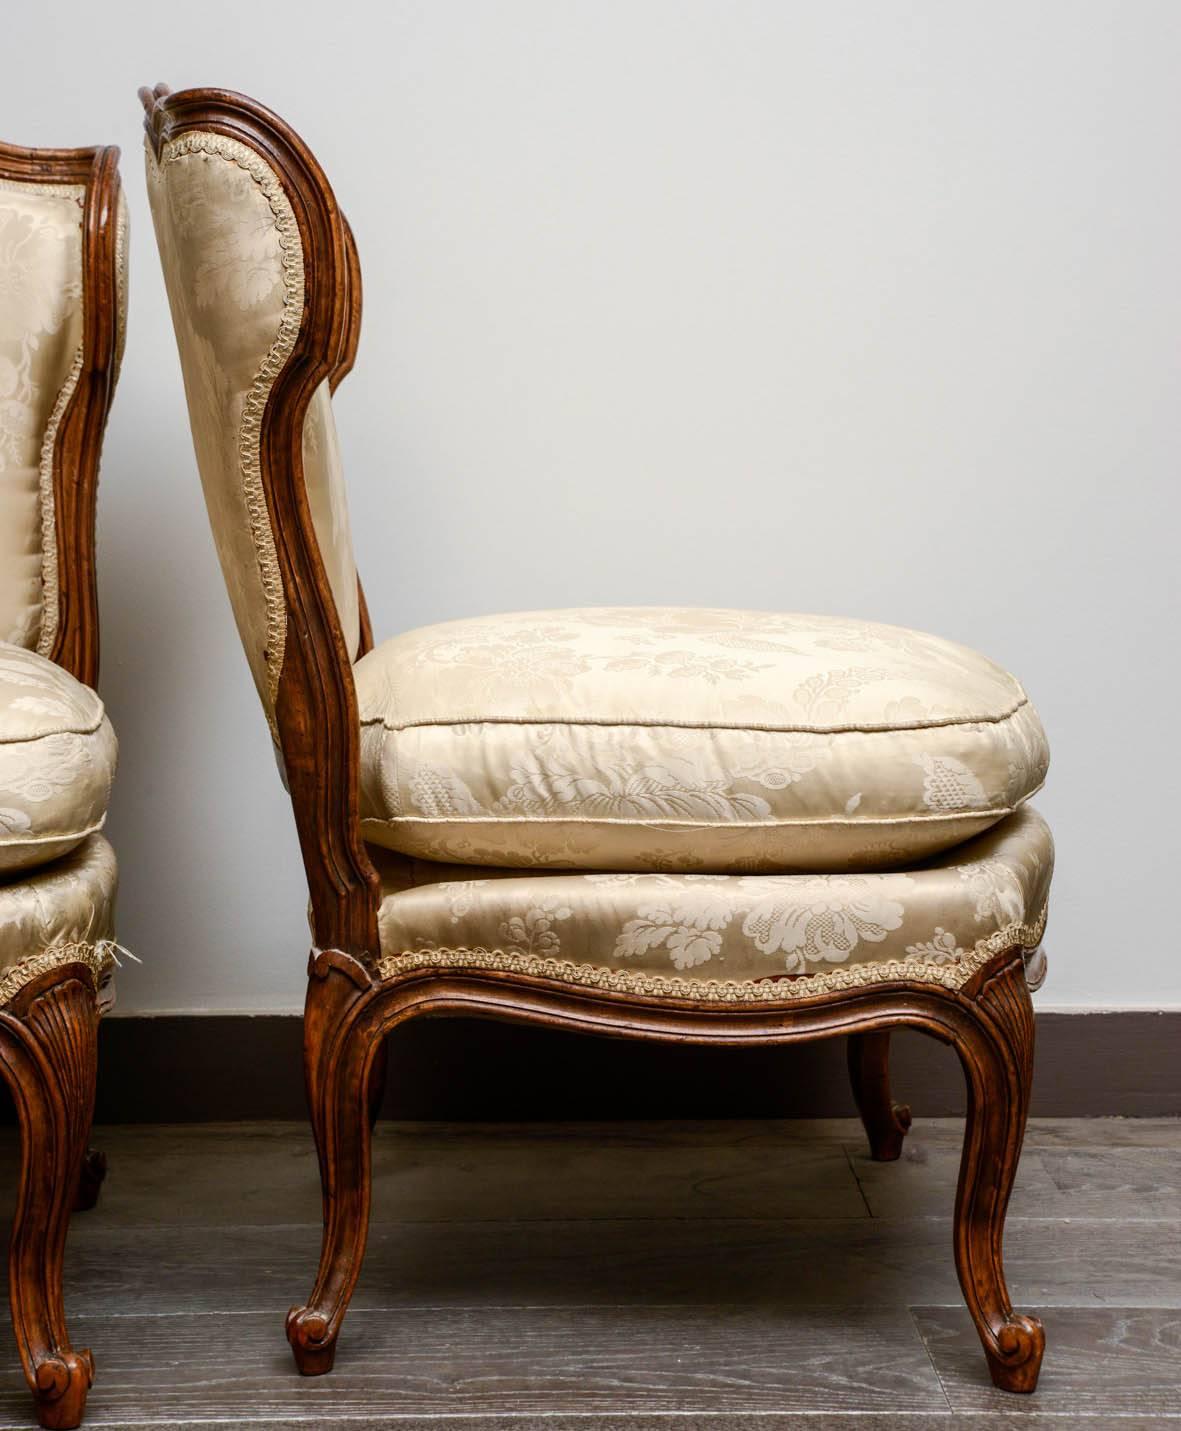 Pair of slipper chairs in Louis XV style.
Very elegant form especially for the top,
circa 1880.
With a fine tapestry.